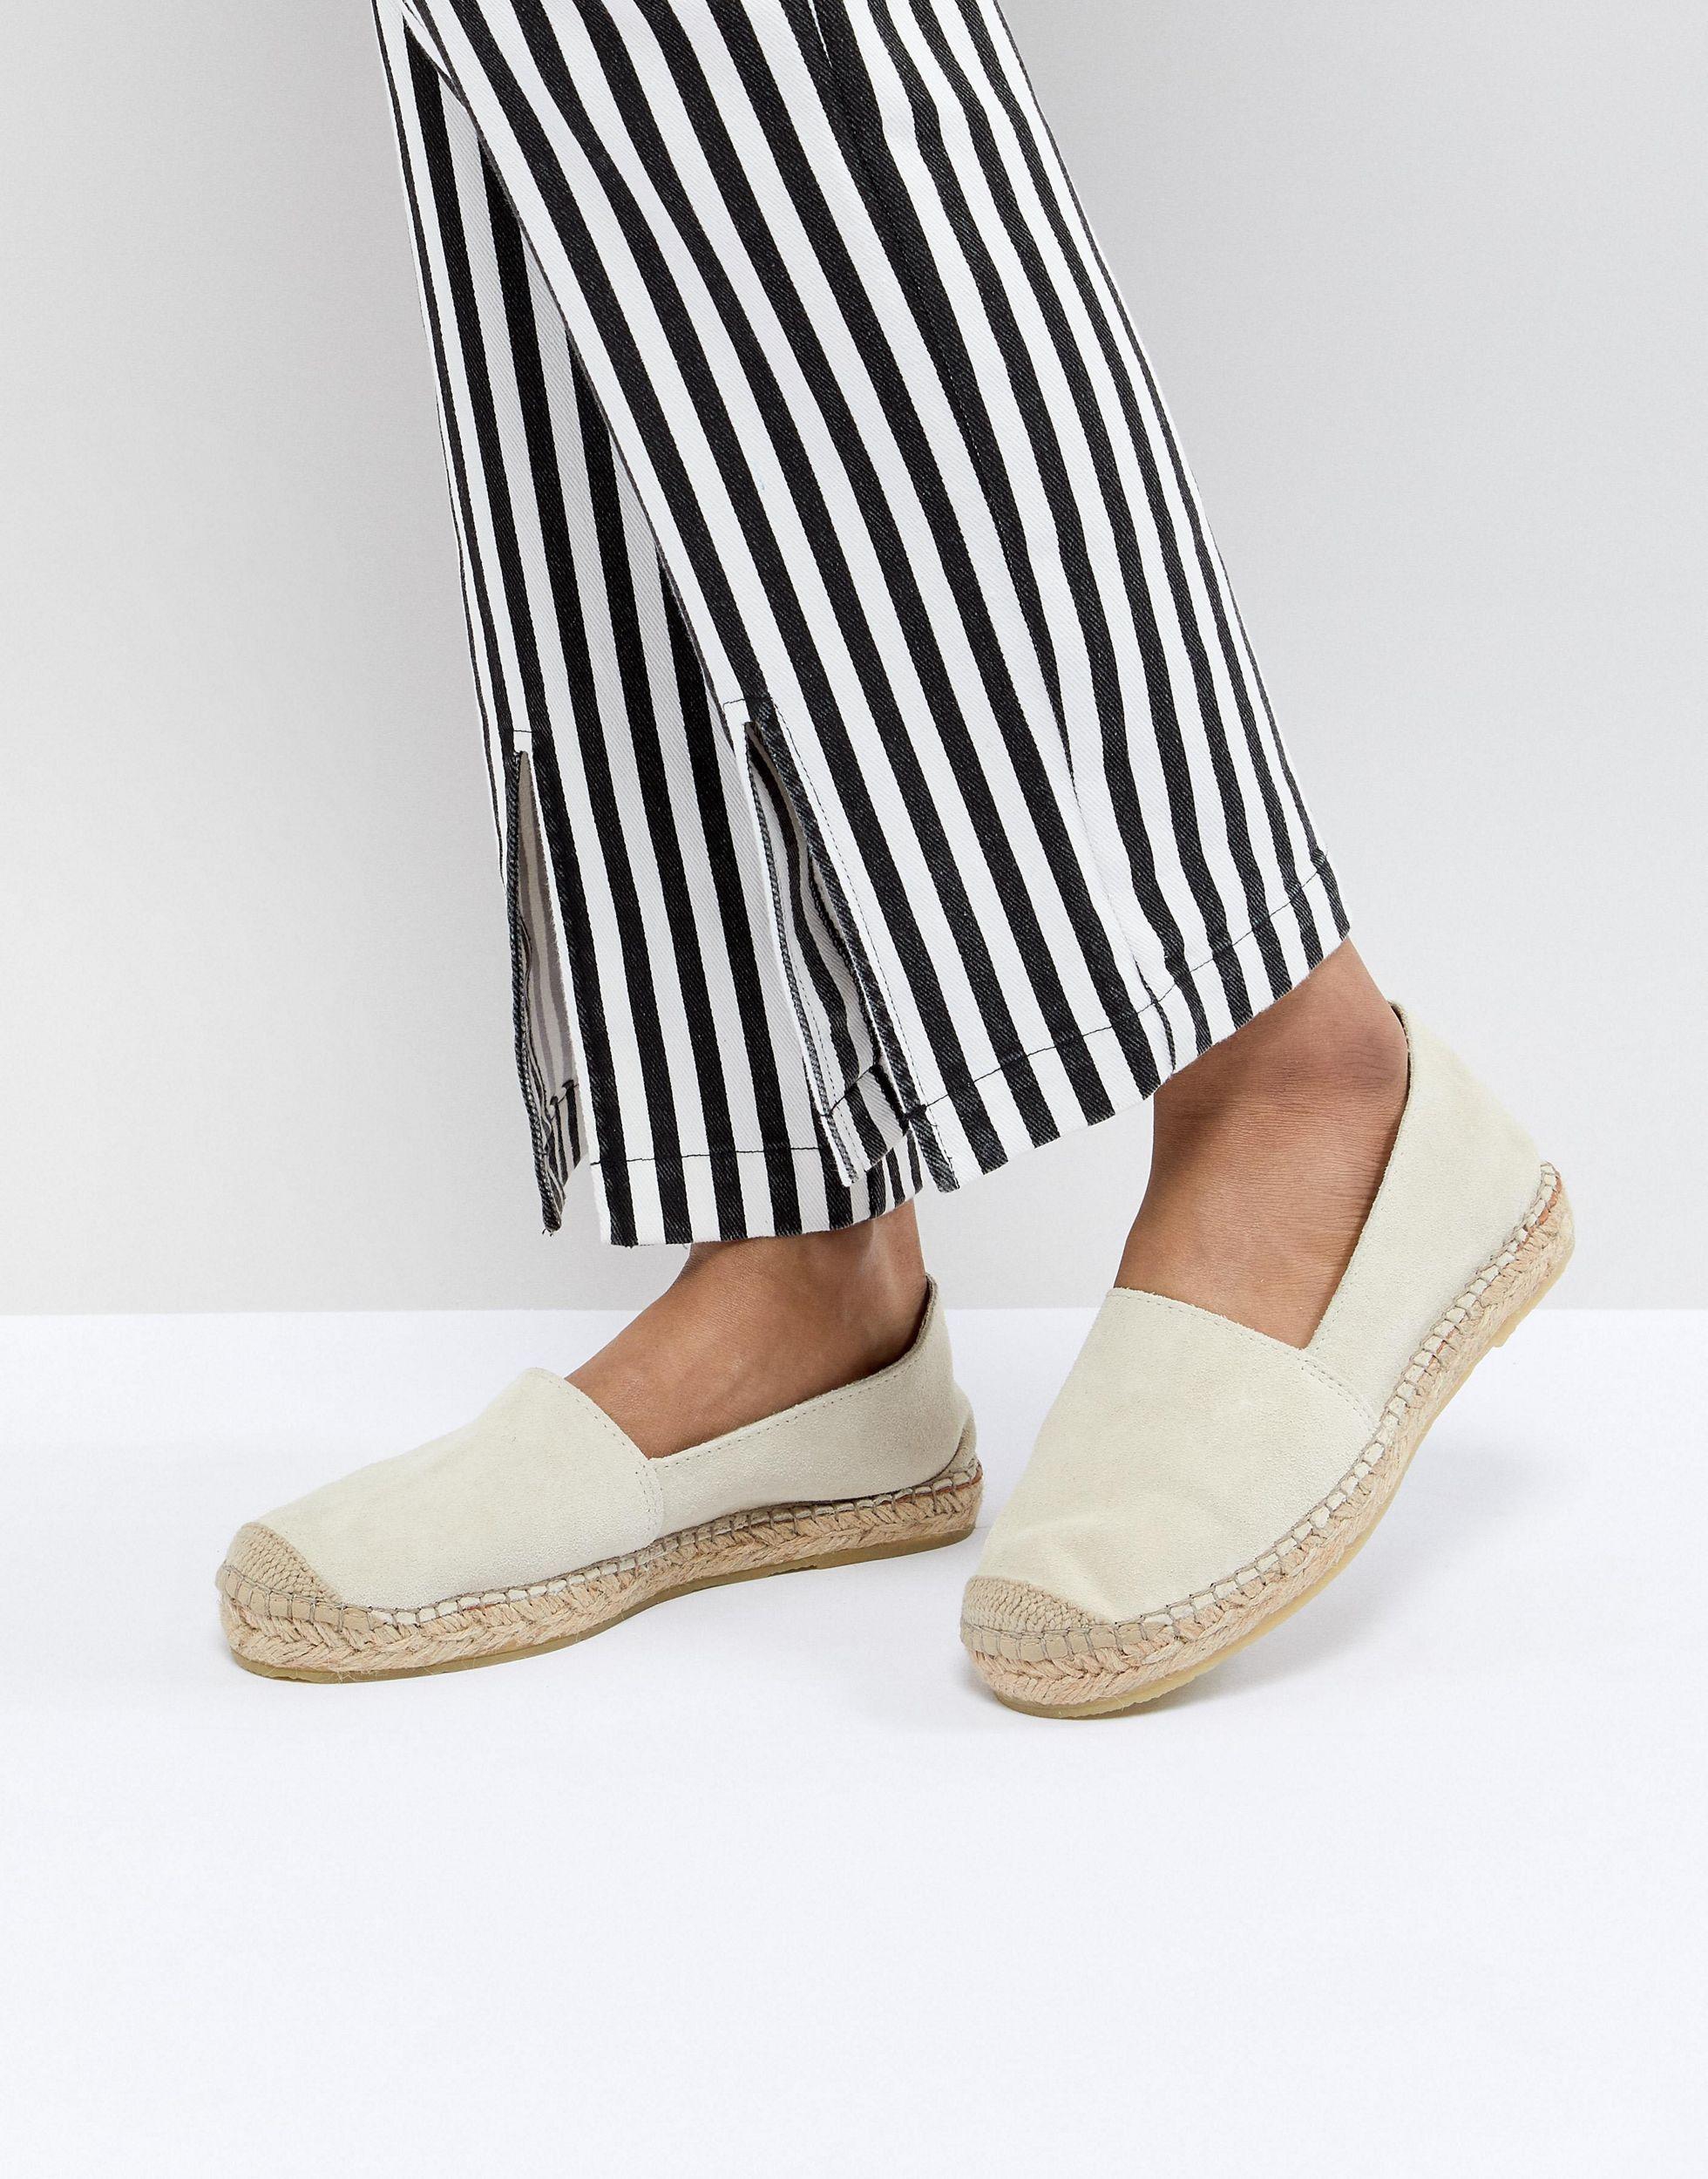 SELECTED Femme Suede Espadrille - Lyst